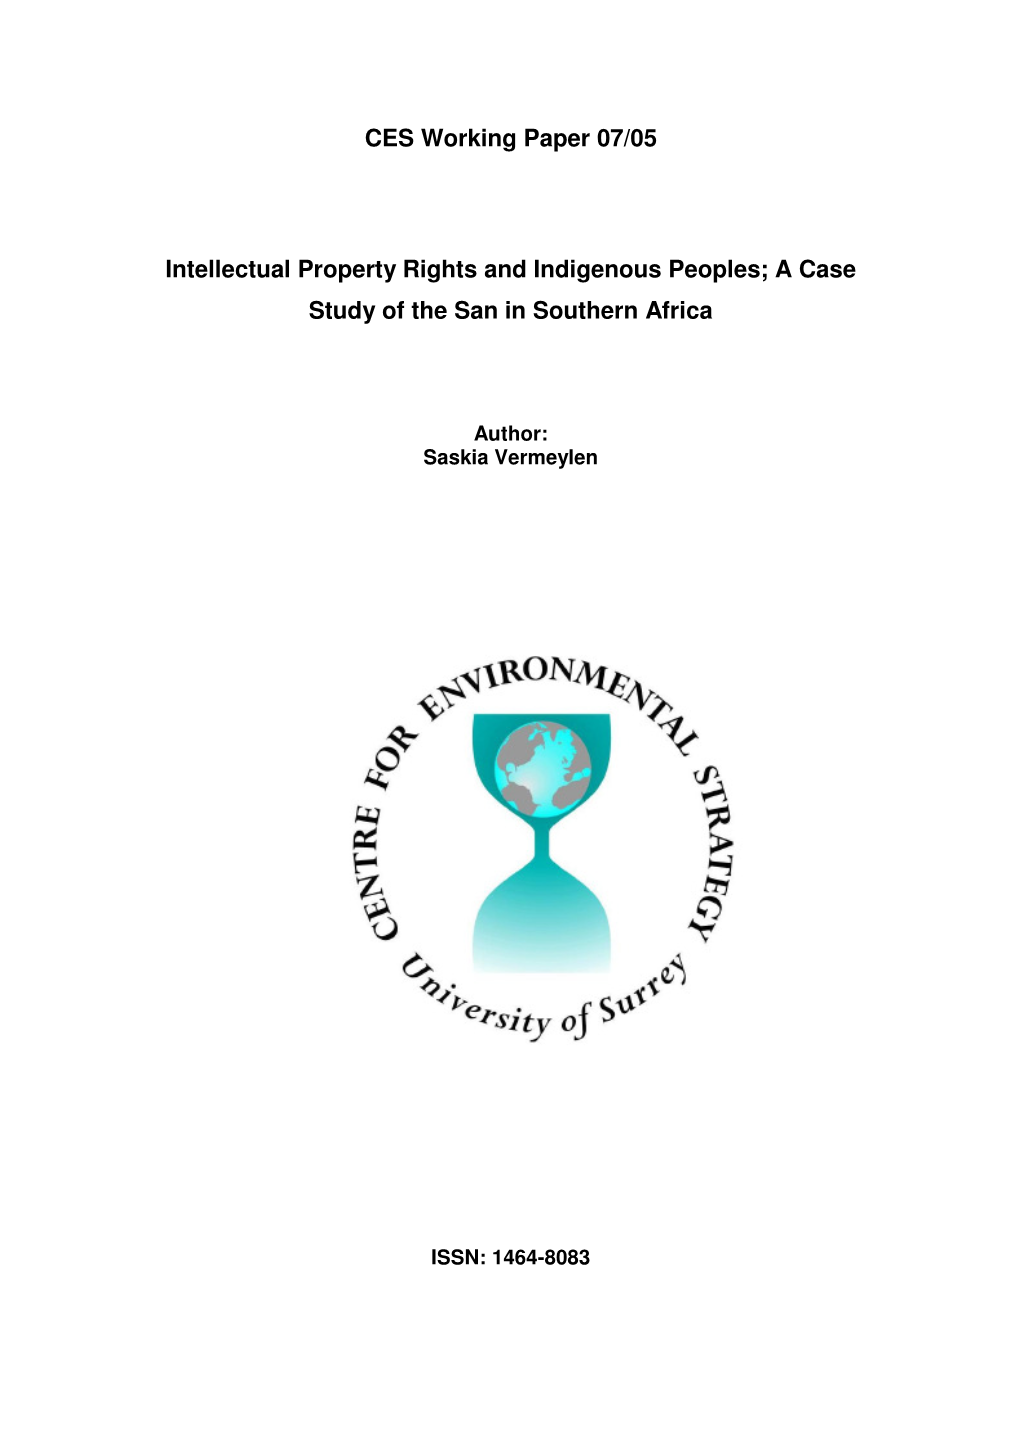 Intellectual Property Rights and Indigenous Peoples: a Case Study of the San in Southern Africa